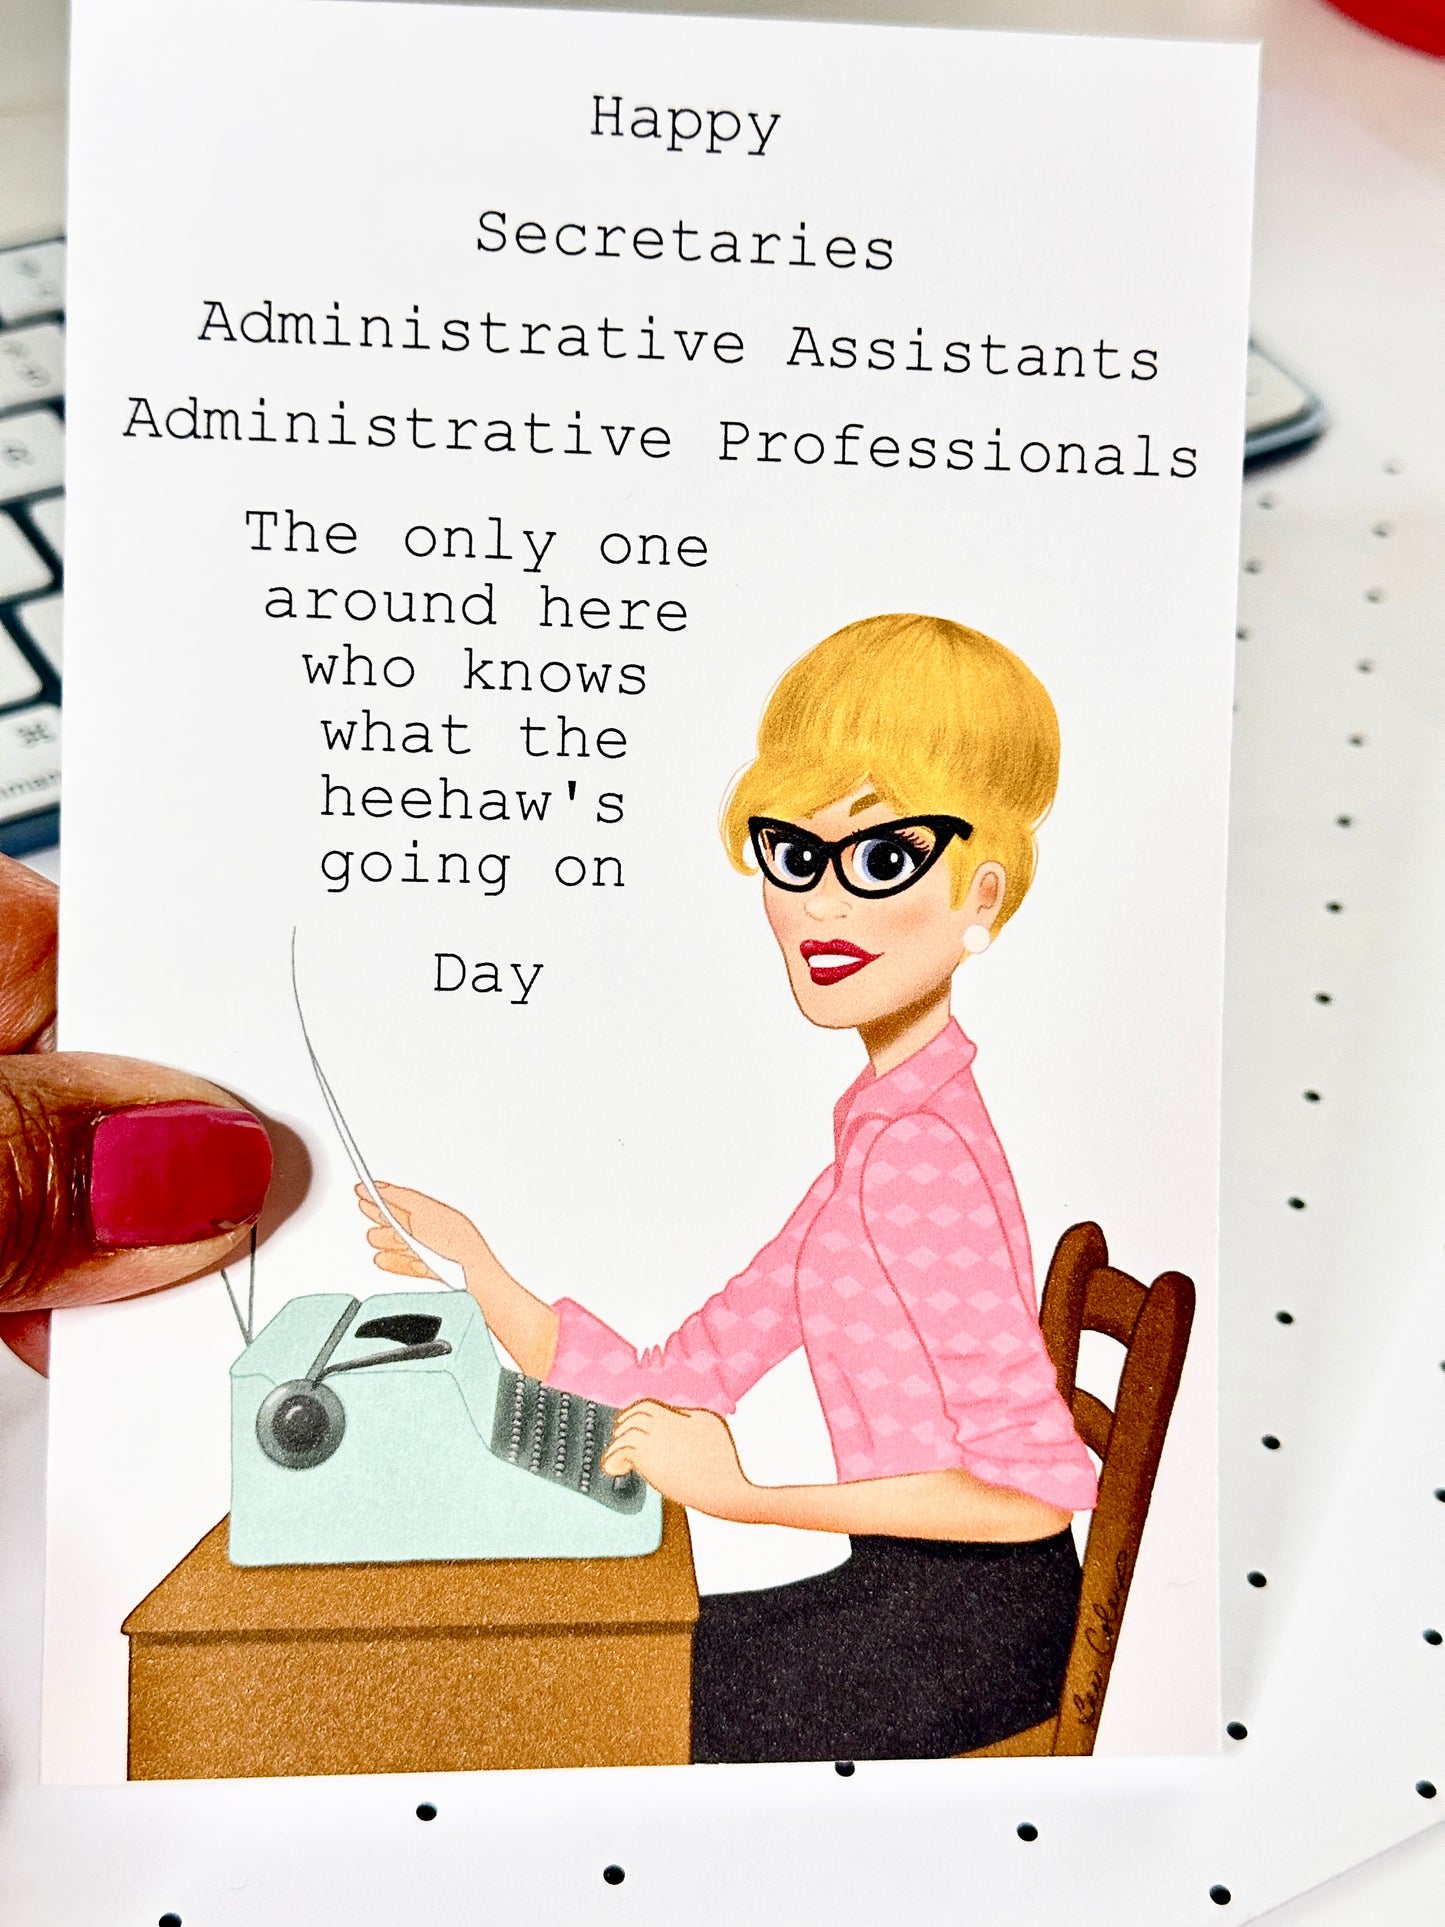 Happy Administrative Professionals Day Greeting Card - Light Skin Tone